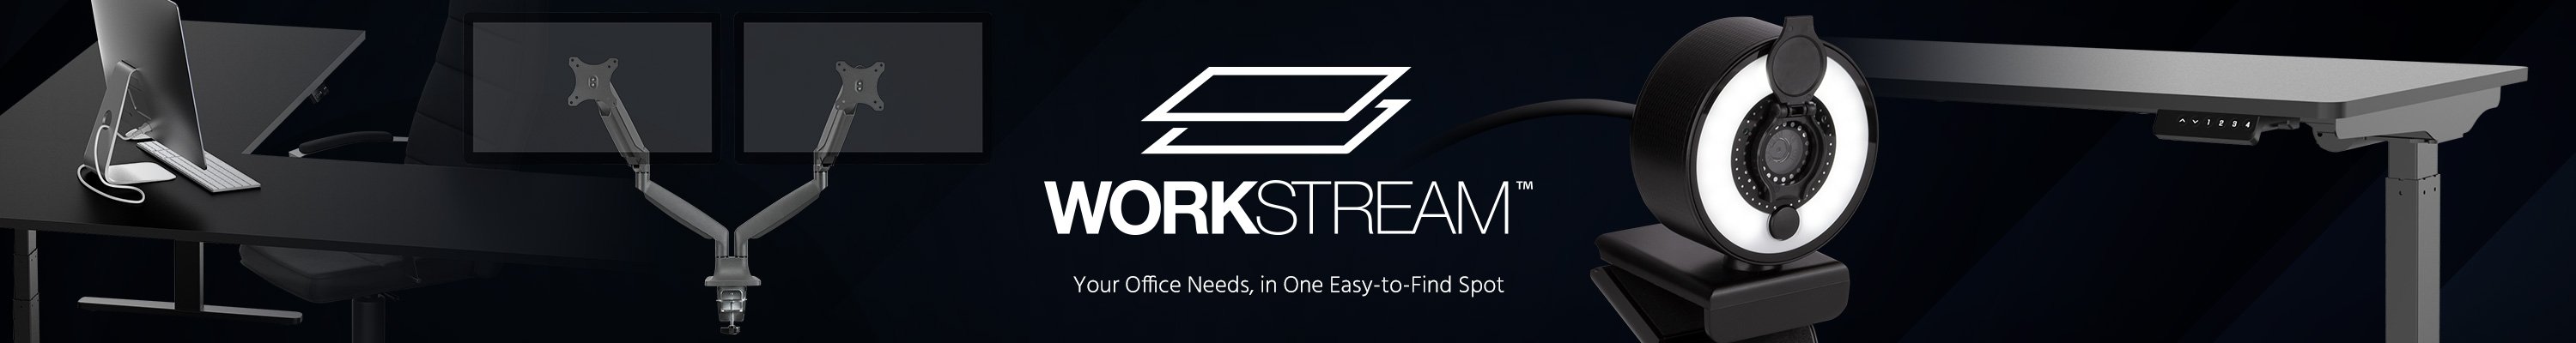 Workstream - Your office needs in one easy to find spot